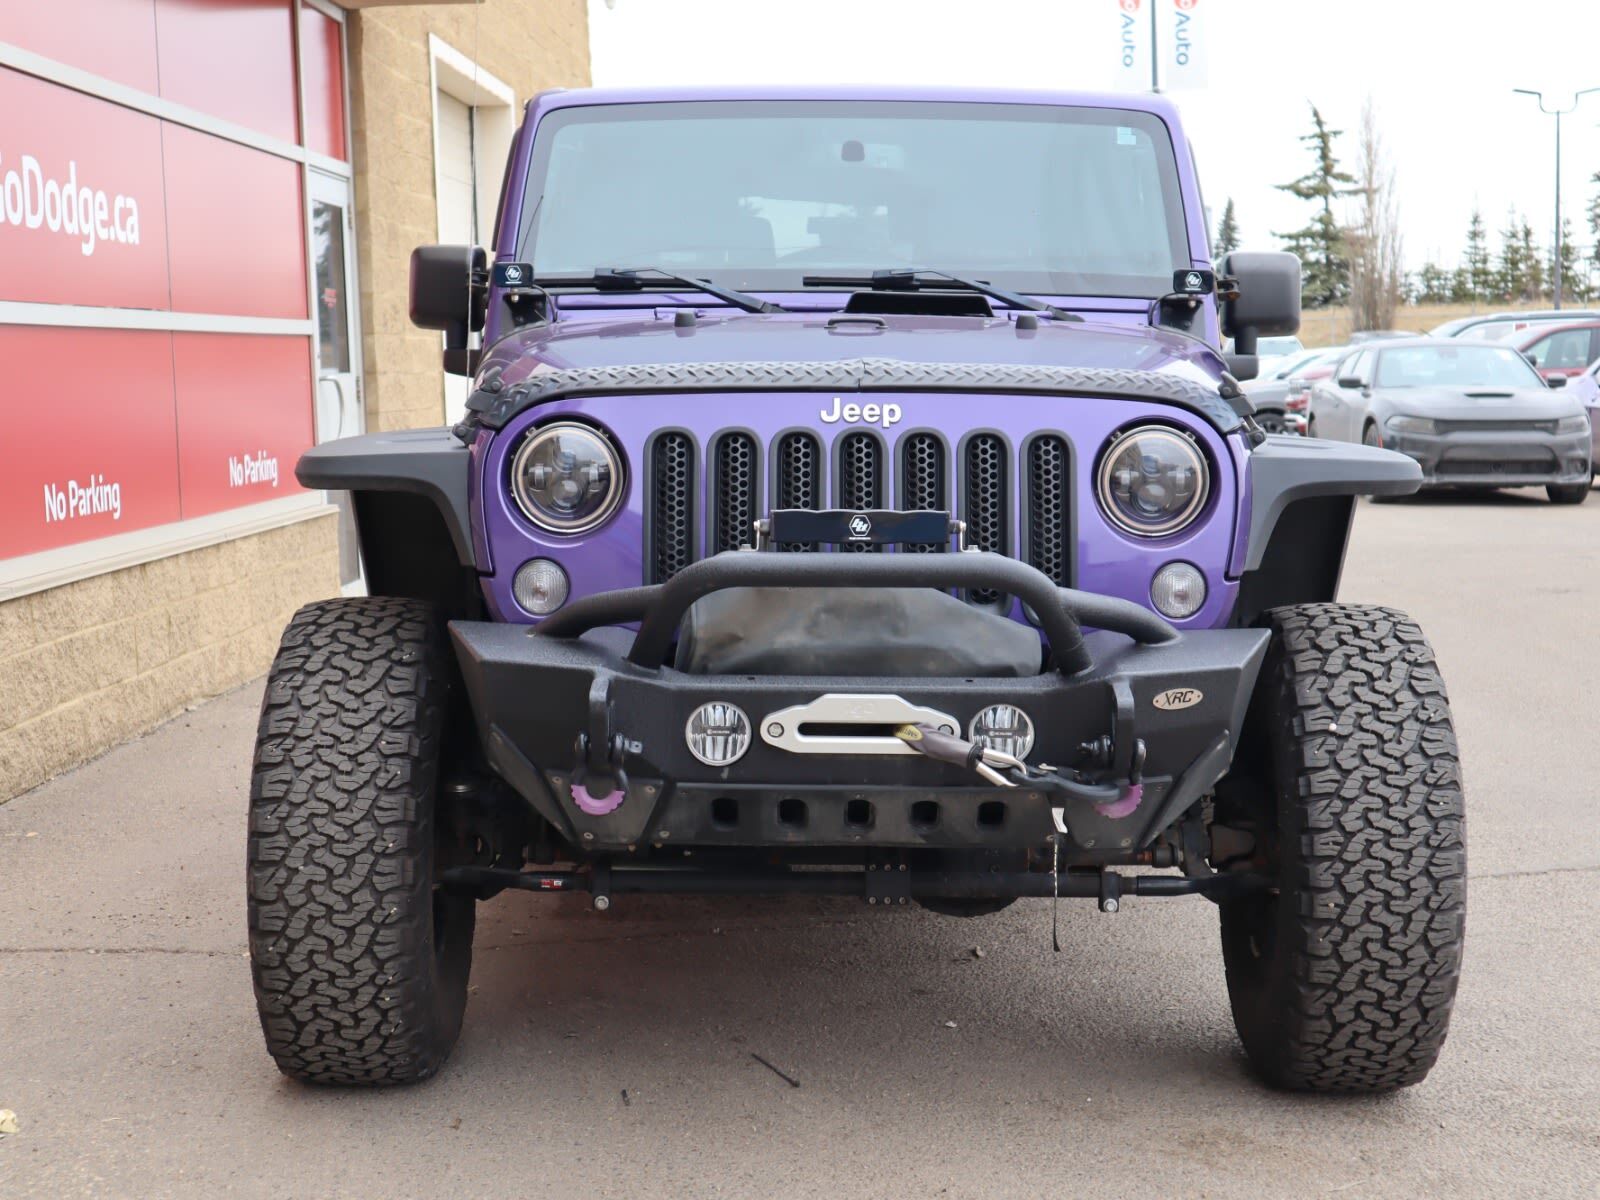 2017 Jeep Wrangler SPORT S IN XTREME PURPLE PEARL EQUIPPED WITH A 3.6